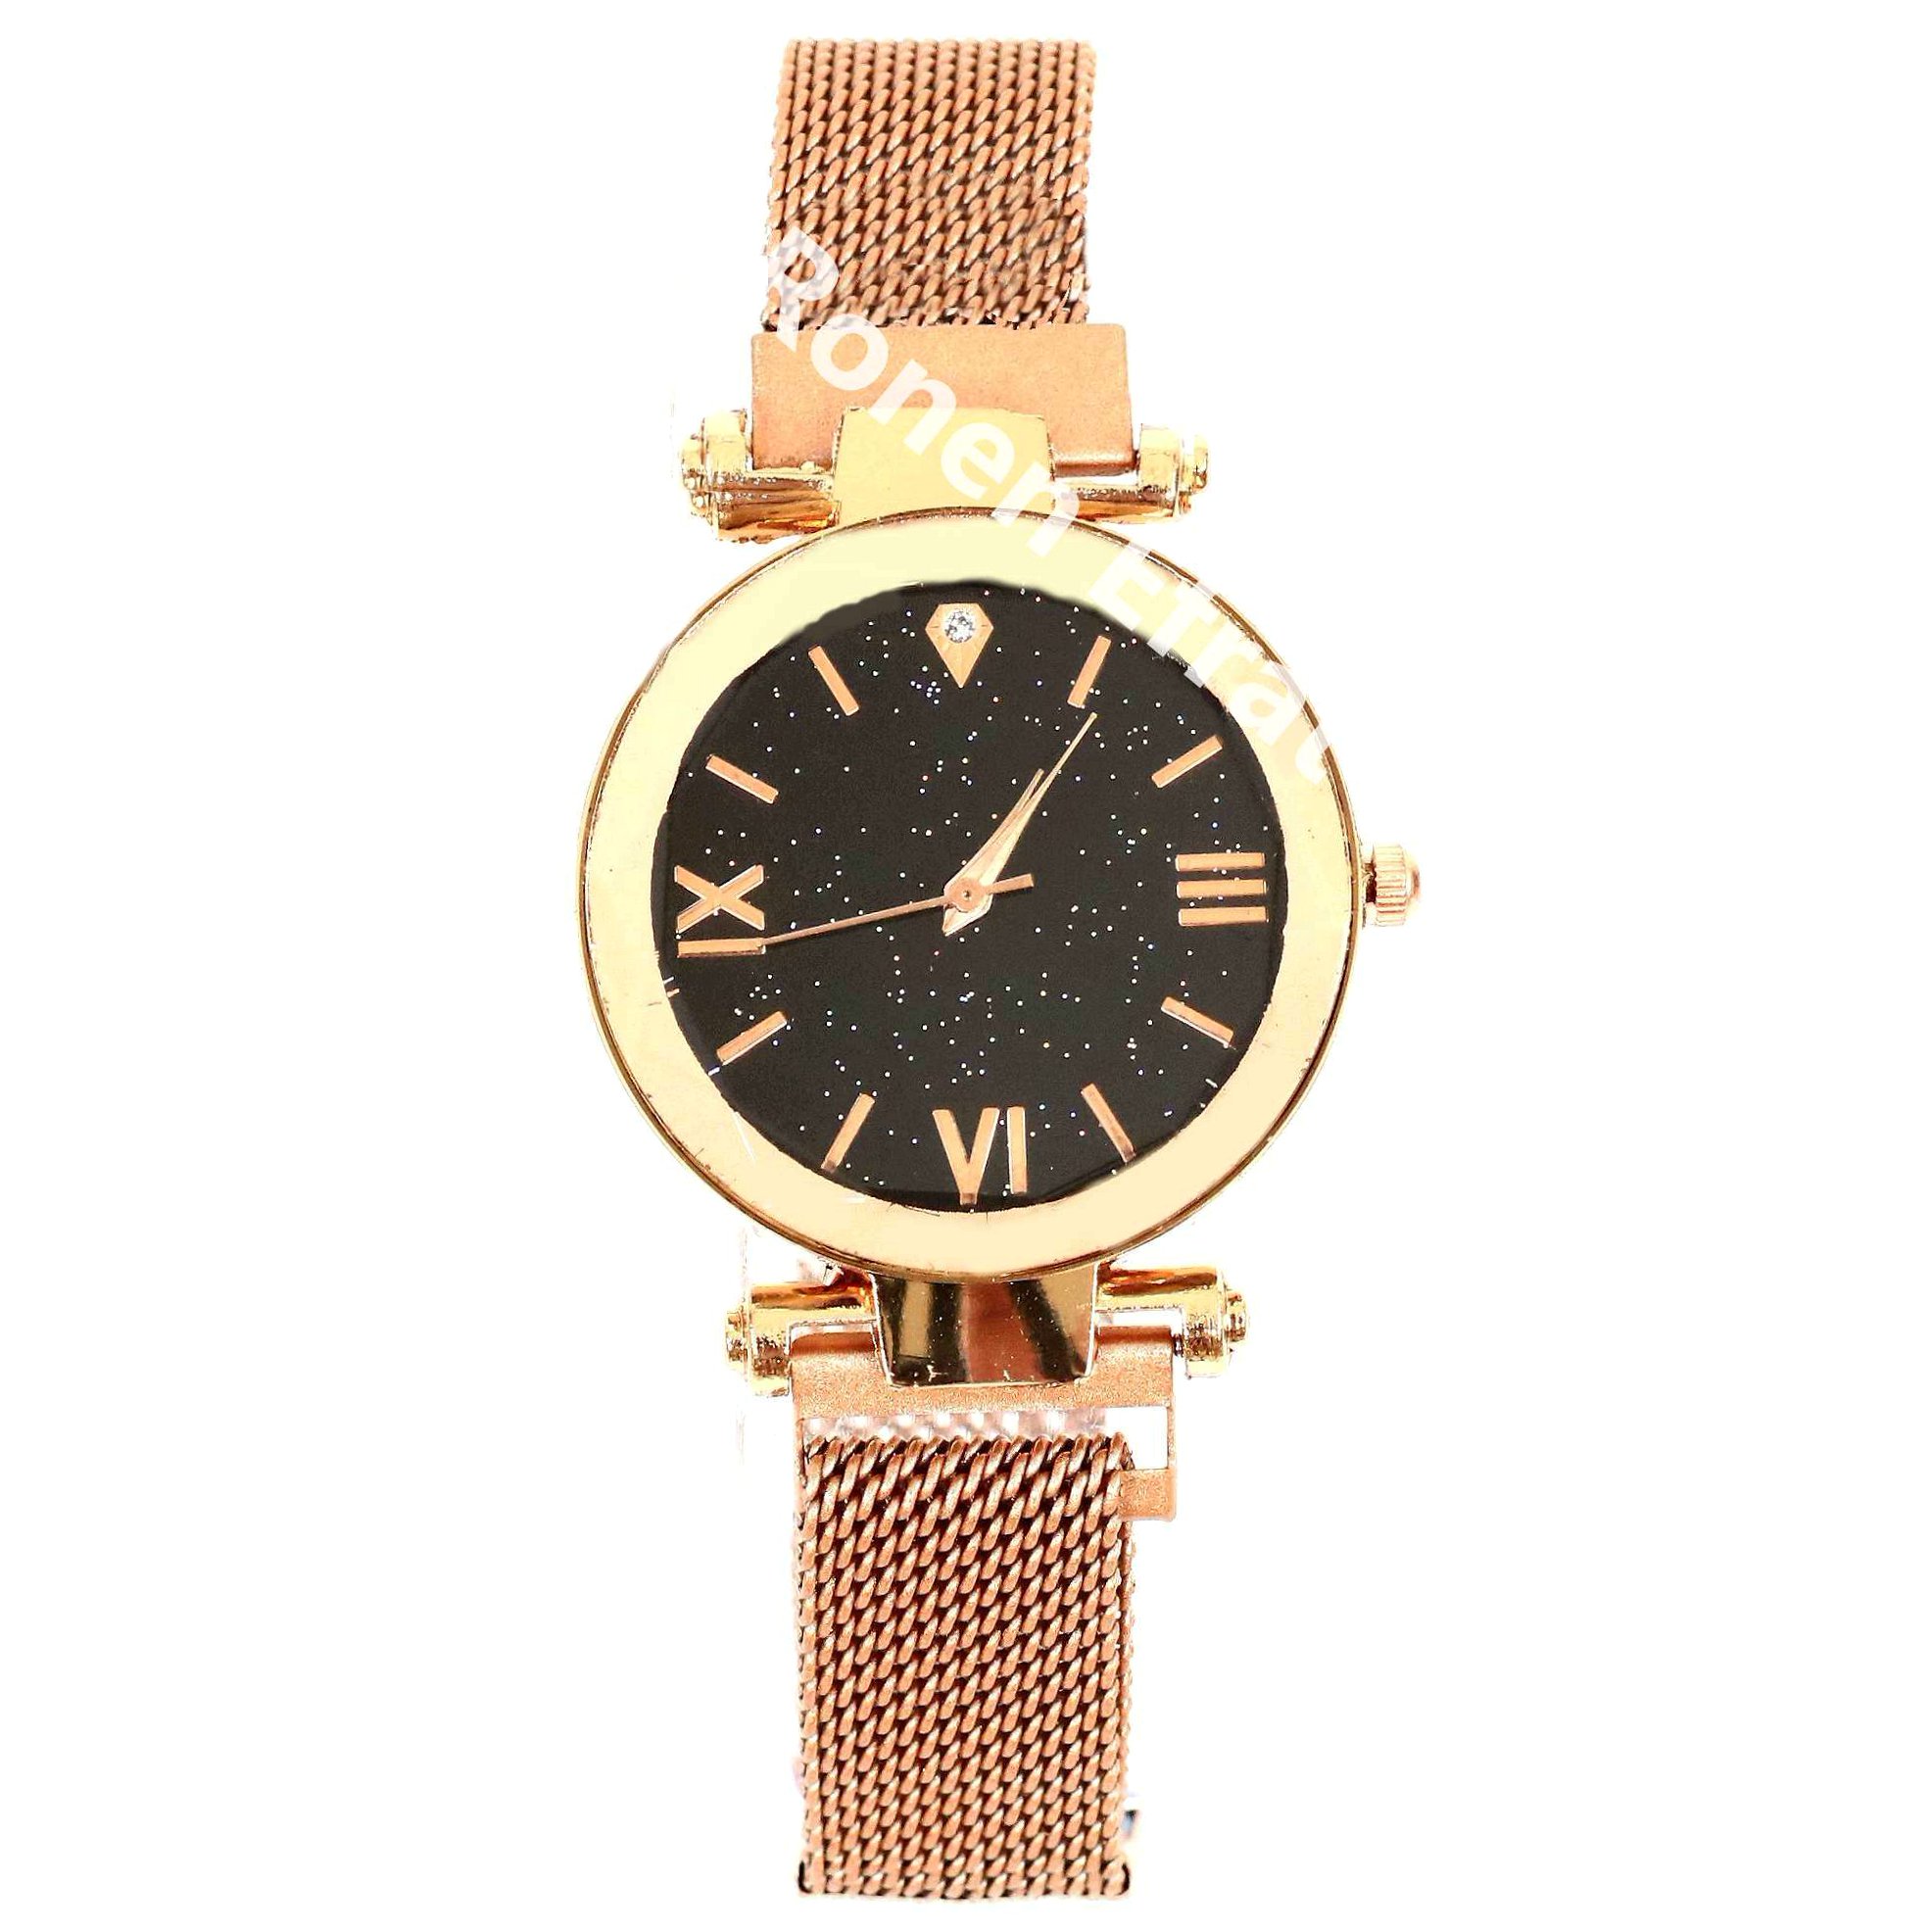 color rose look watch A jewel stunning gold with a fashionable in